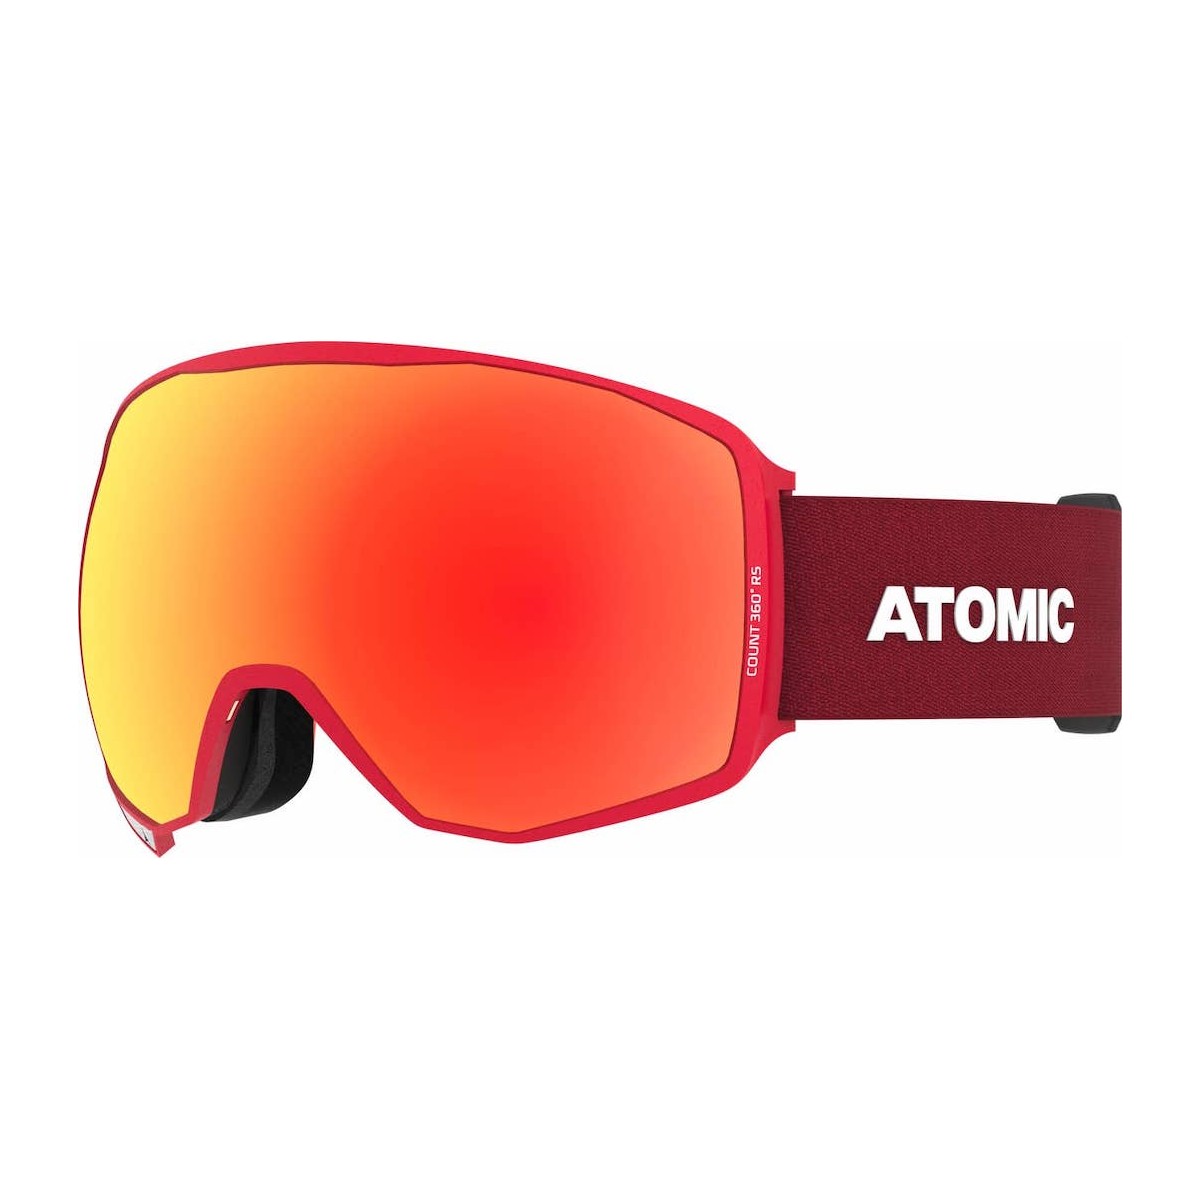 ATOMIC COUNT 360 HD RS W/RED HD C2-3 W/YELLOW BLUE HD C2-3 W/CLEAR C0 goggles - red